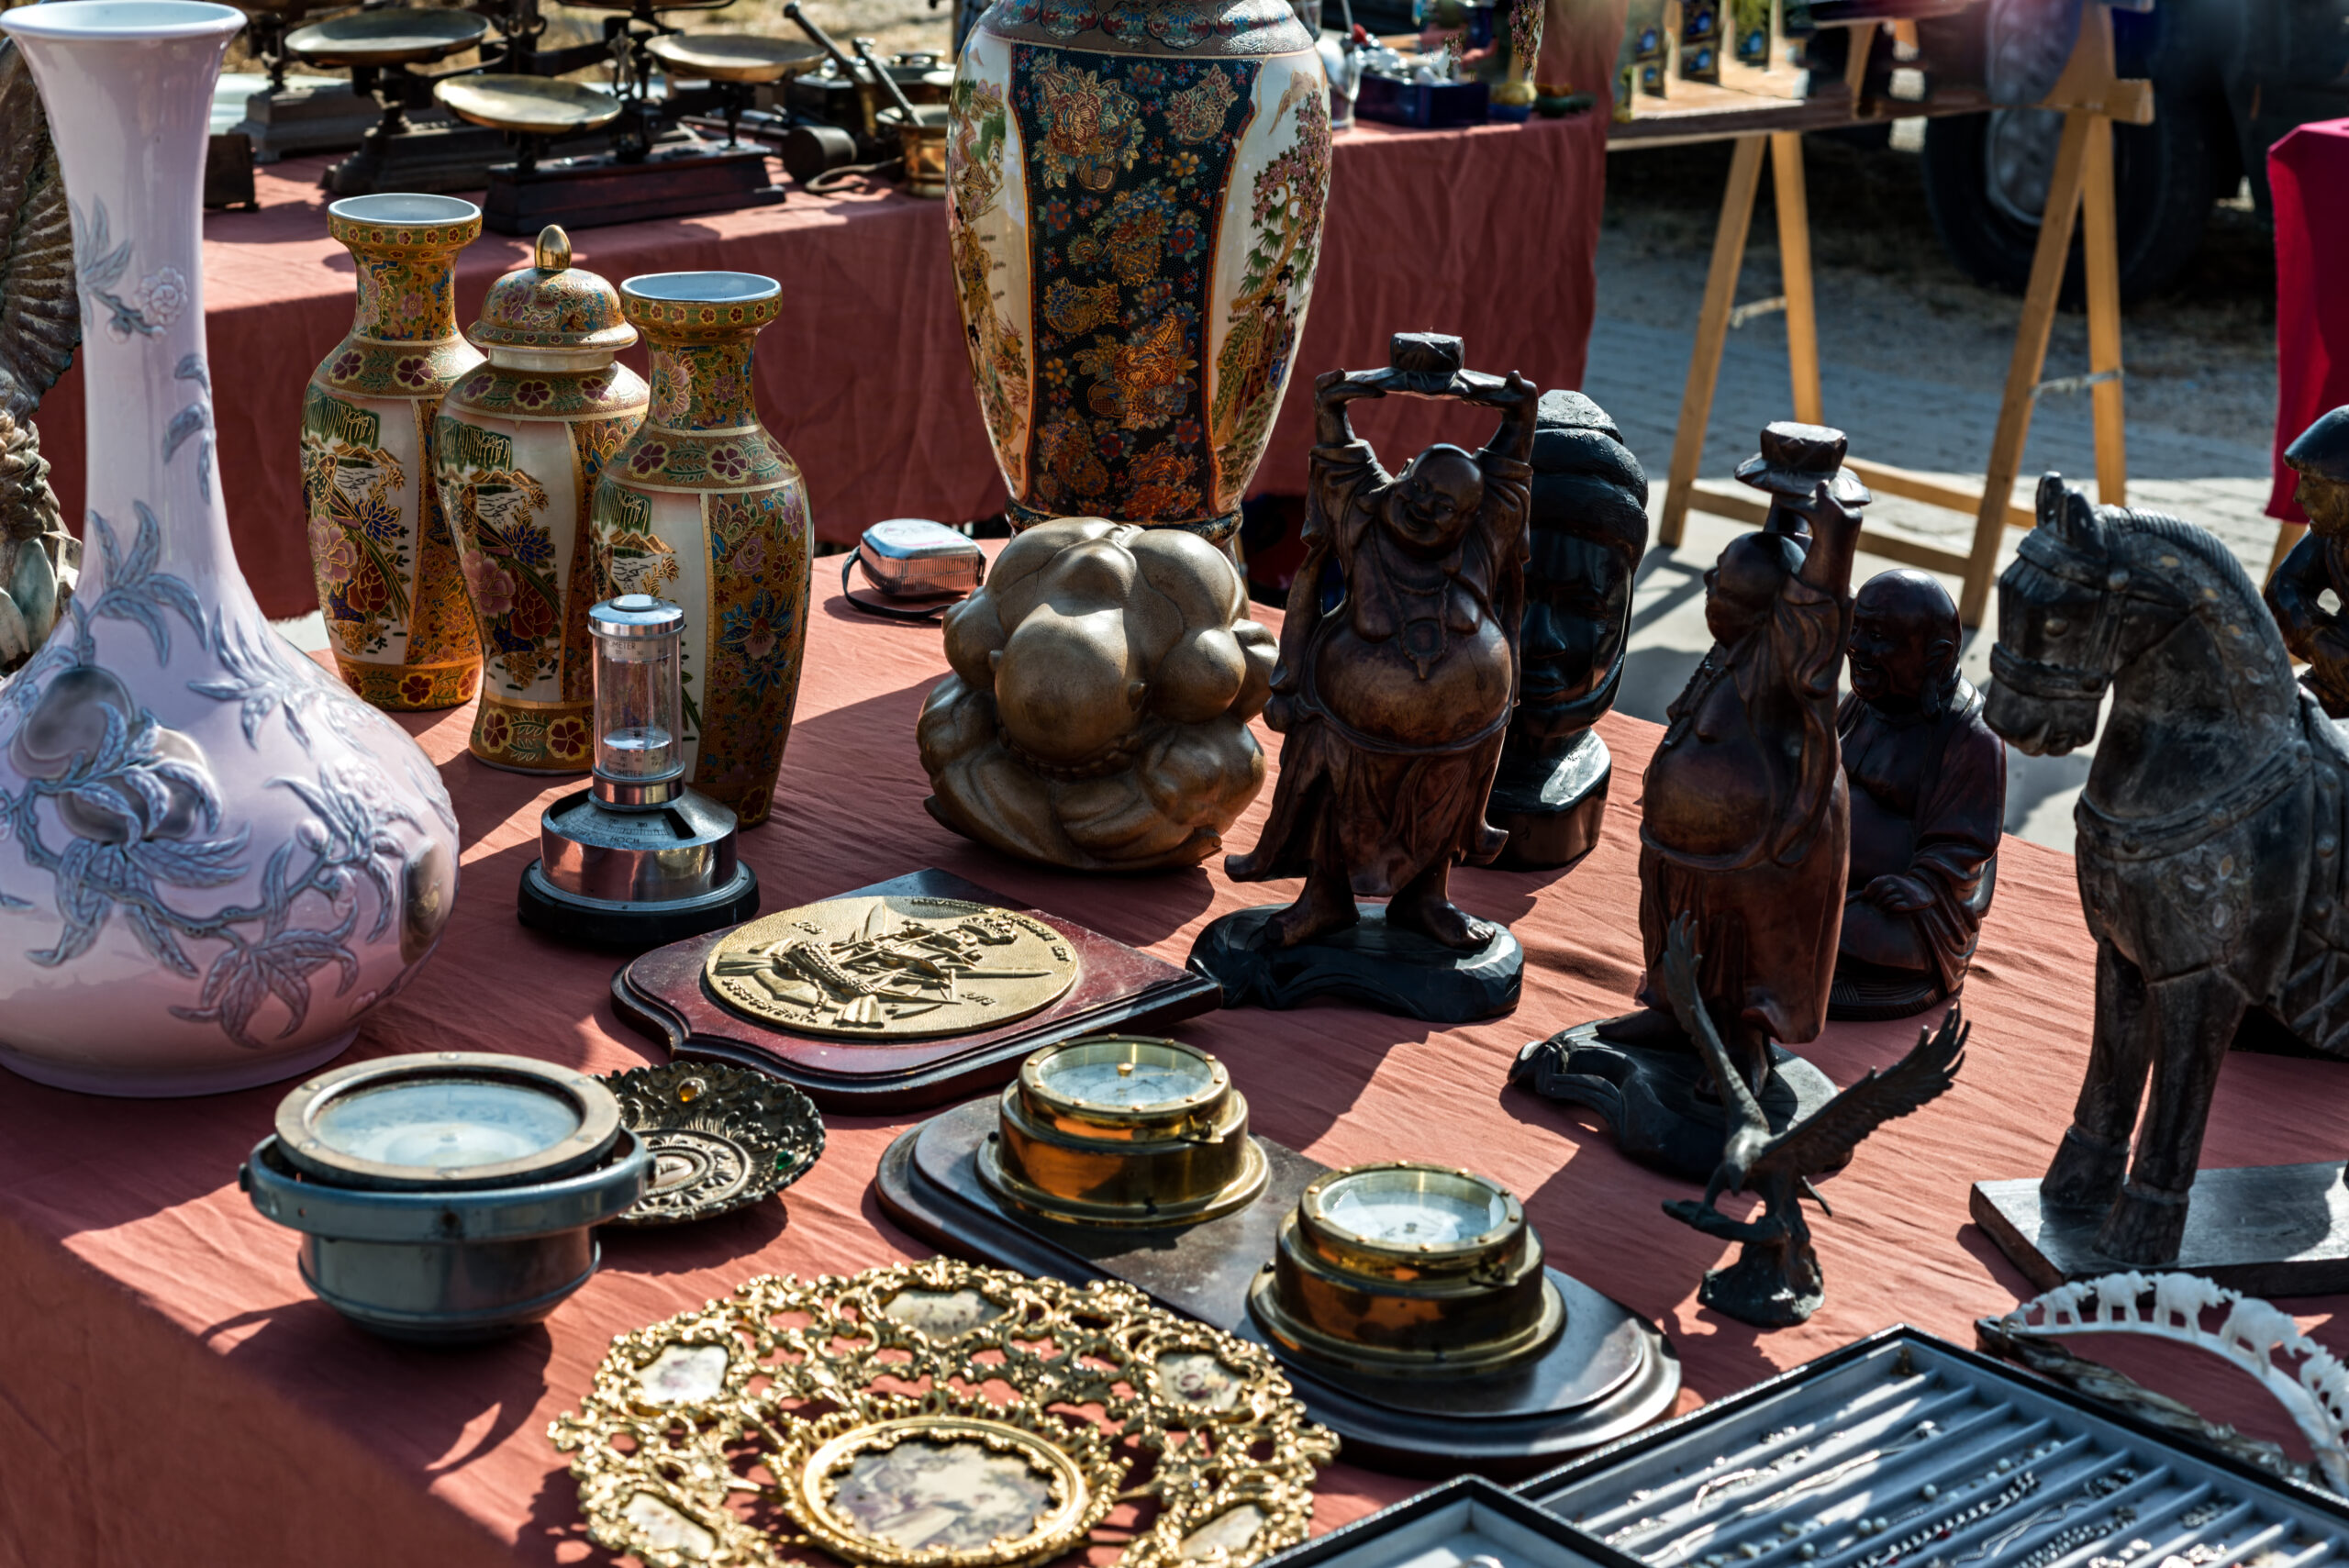 Objects for sale in an antique market